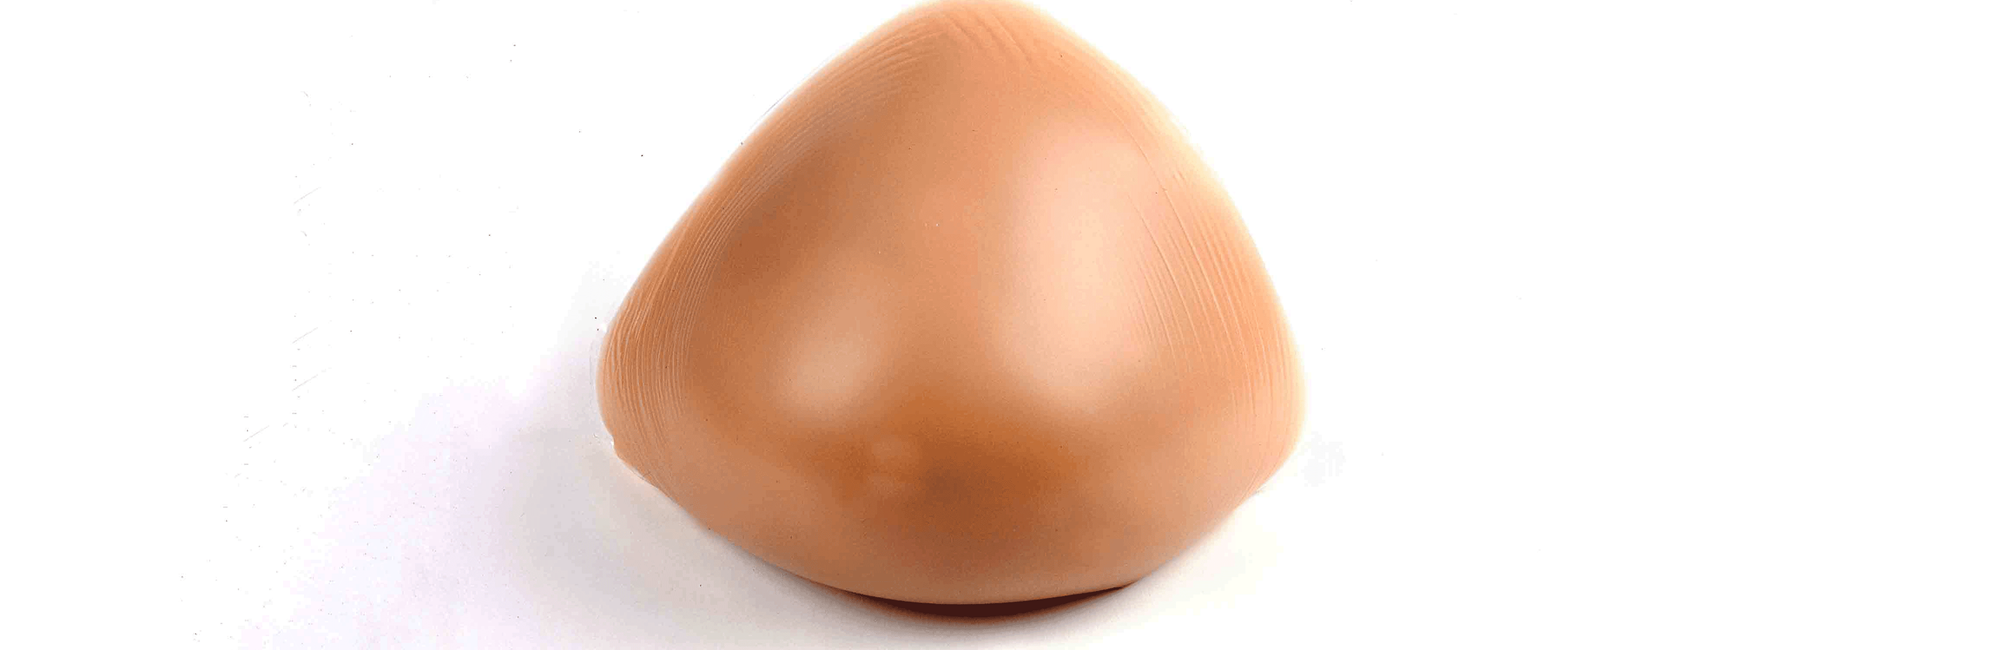 Mastectomy Breast Forms (Prostheses)